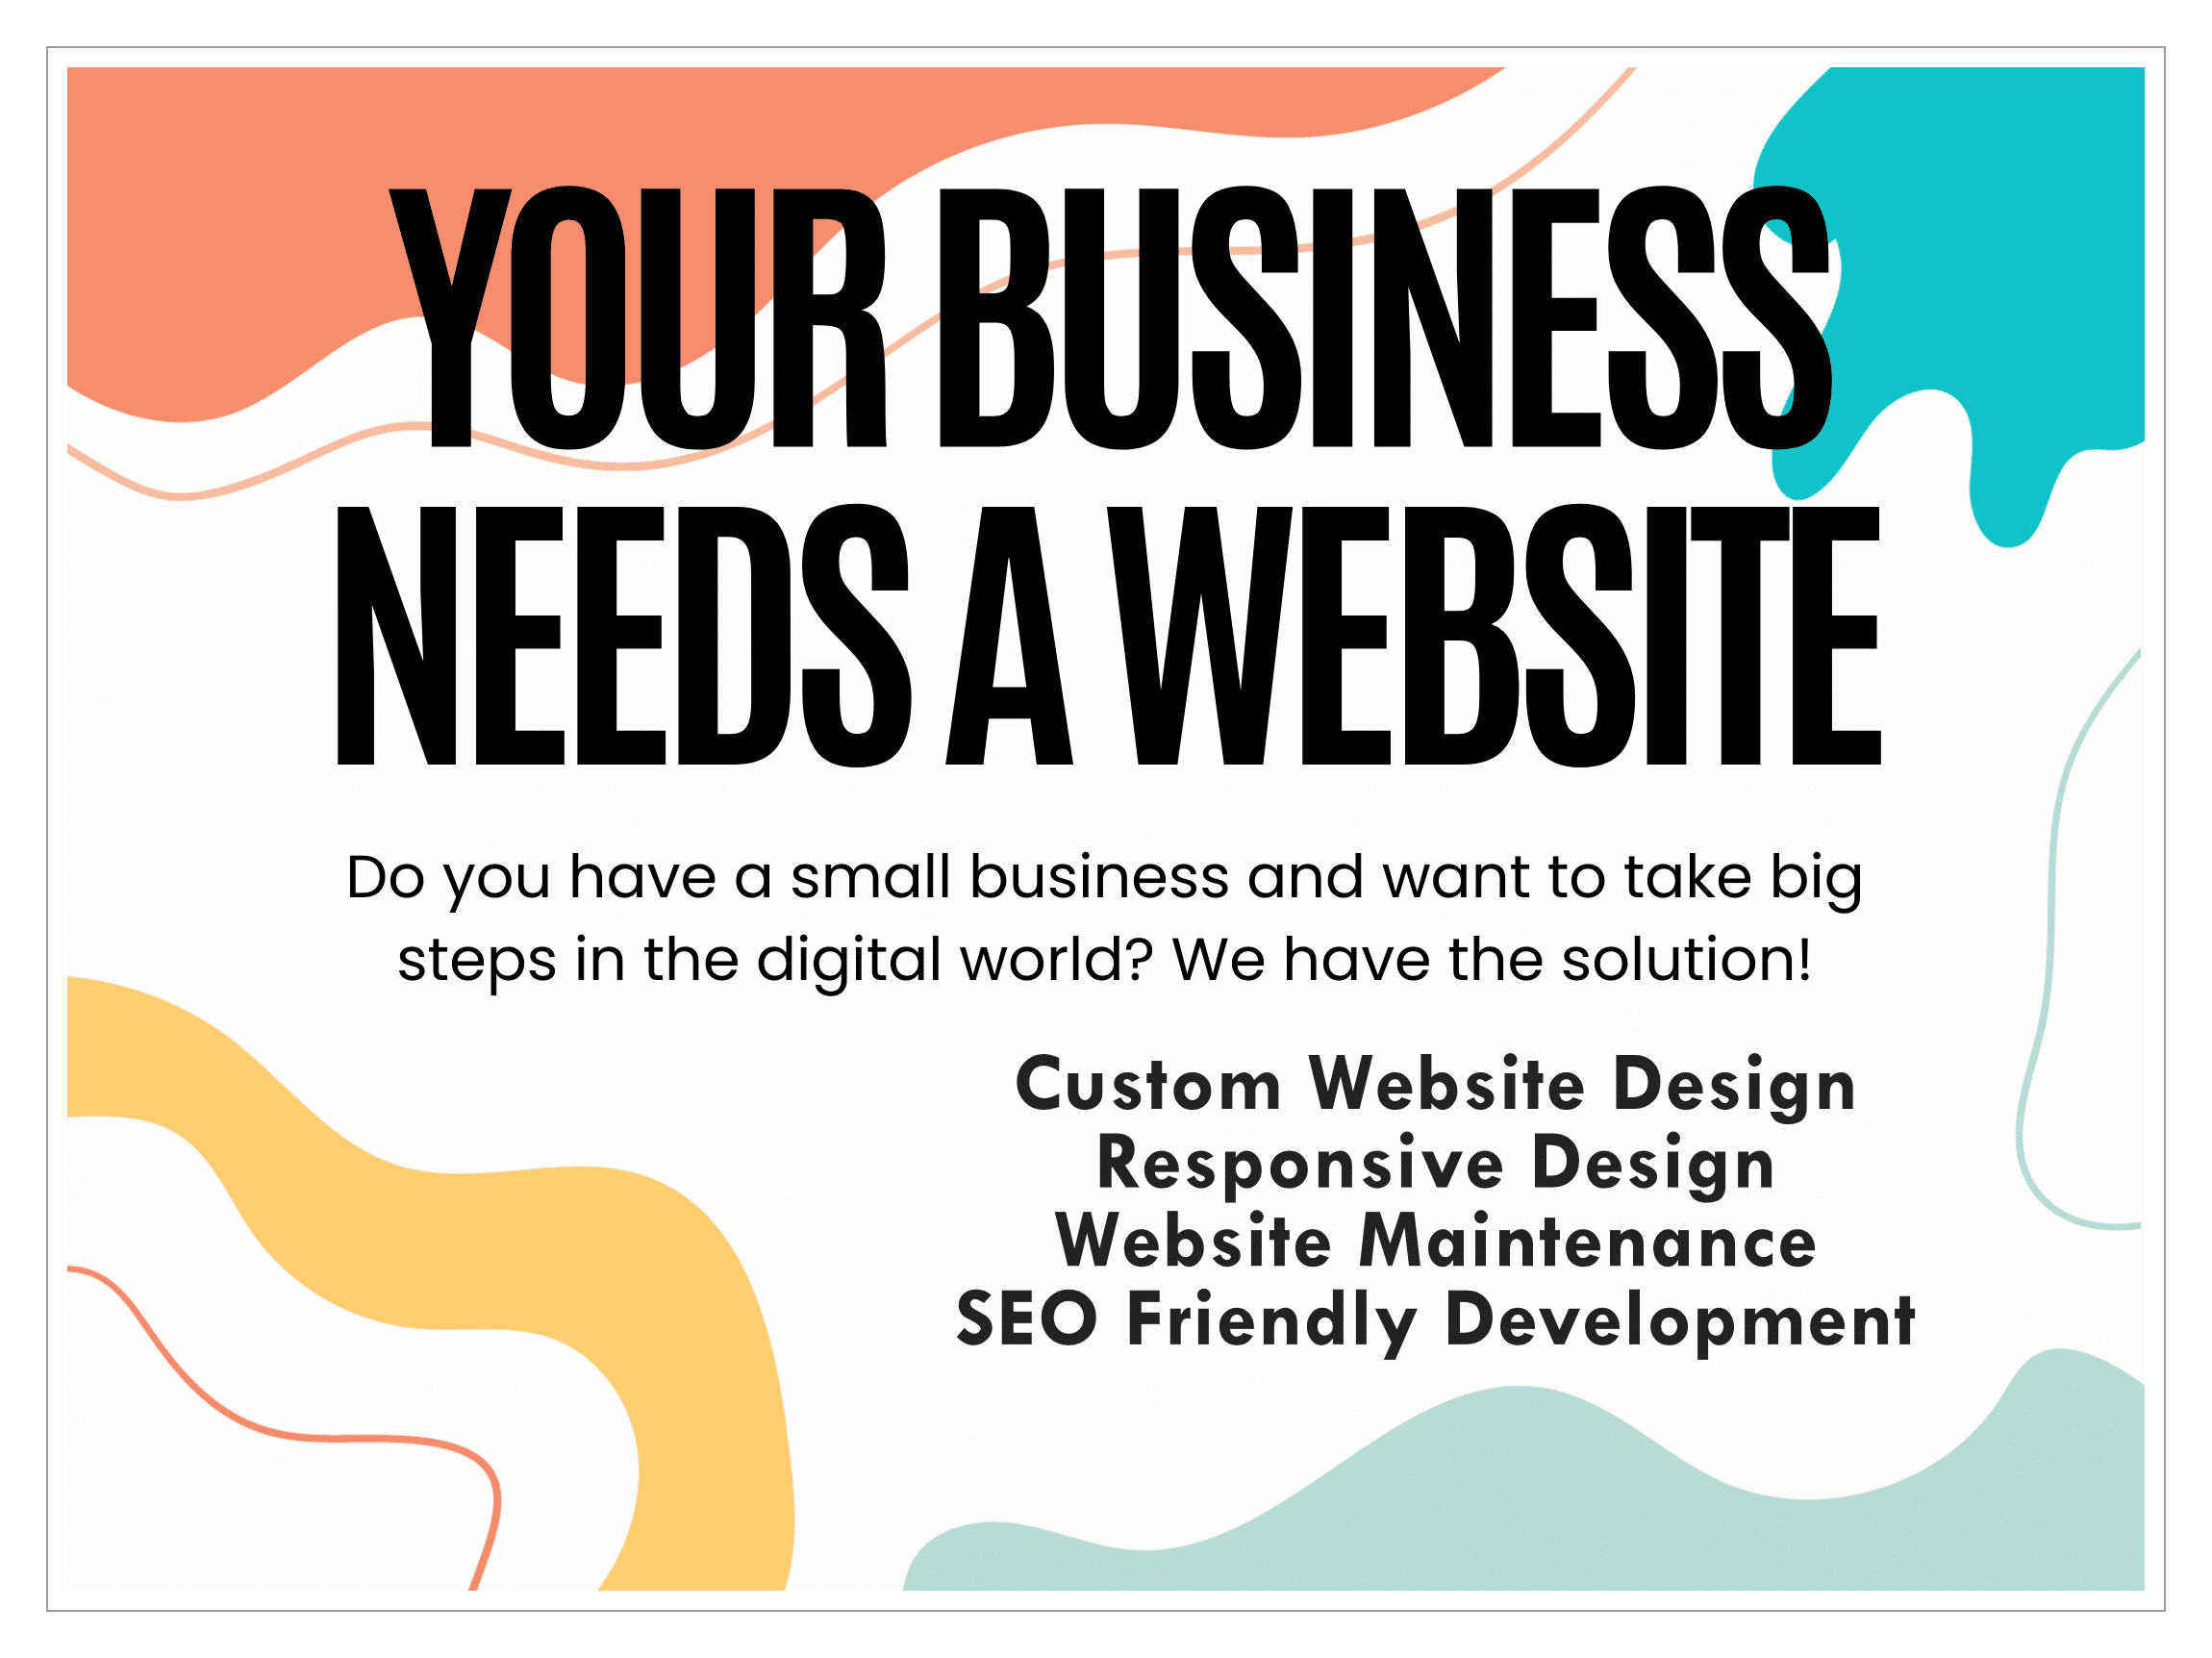 Your business needs a website. Do you have a small business and want to take big steps in the digital world? We have the solution. Custom Website Design. Responsive Design. Website Maintenance. SEO Friendly Development.